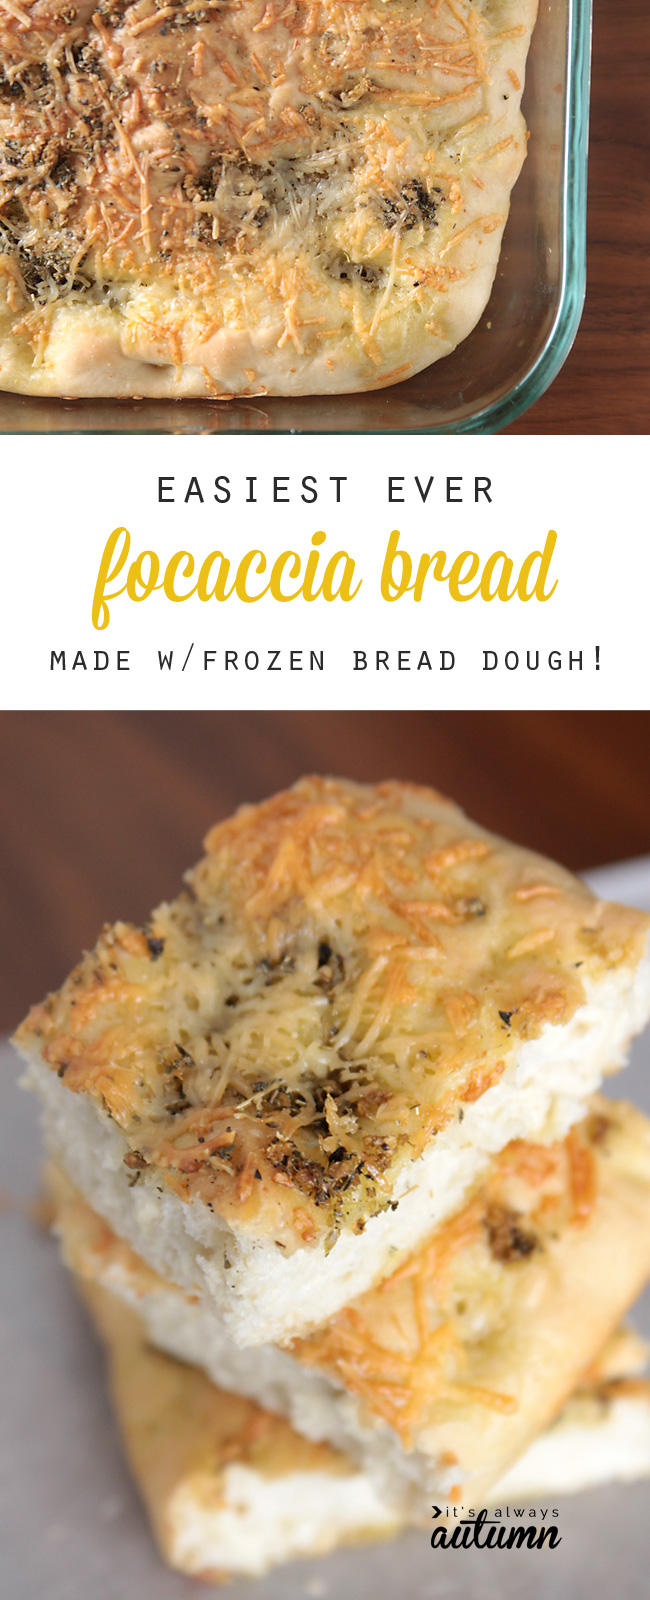 Easiest ever focaccia bread made with frozen bread dough